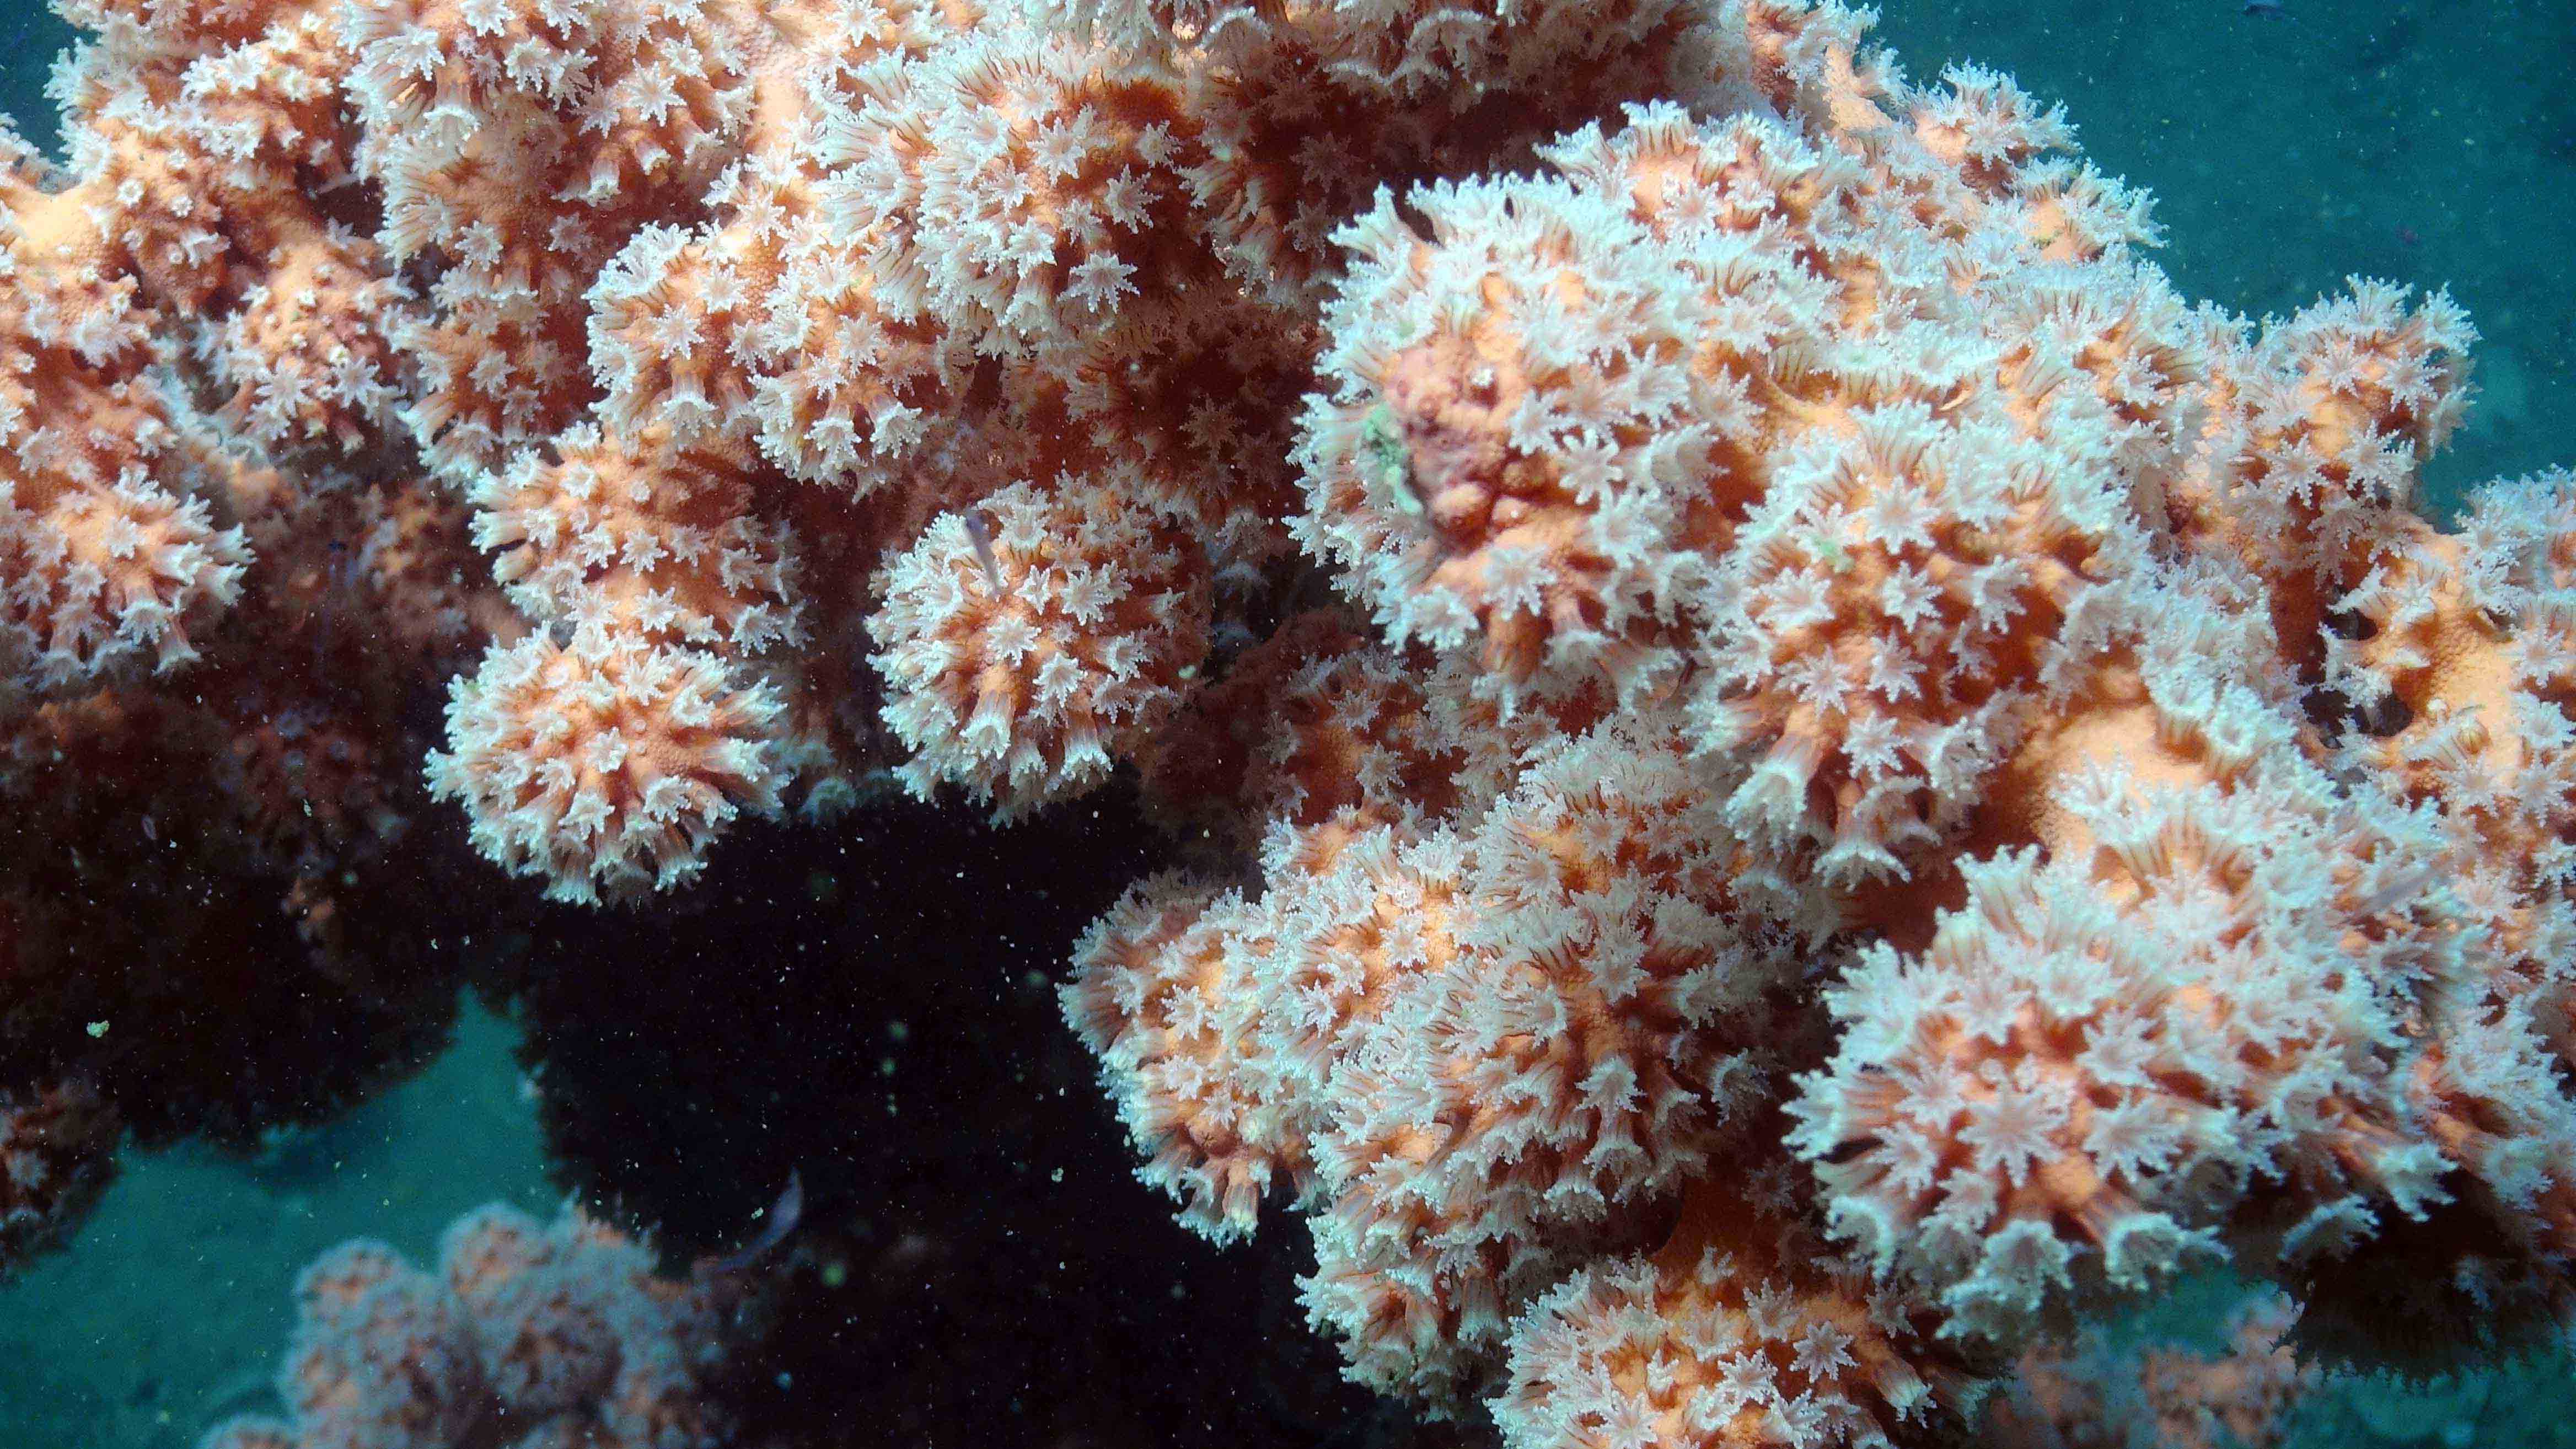 The common name “bubblegum” comes from the bulbous ends on the branches of these corals in the group with the scientific name Paragorgia. These can grow to be several yards tall and form dense, colorful gardens.